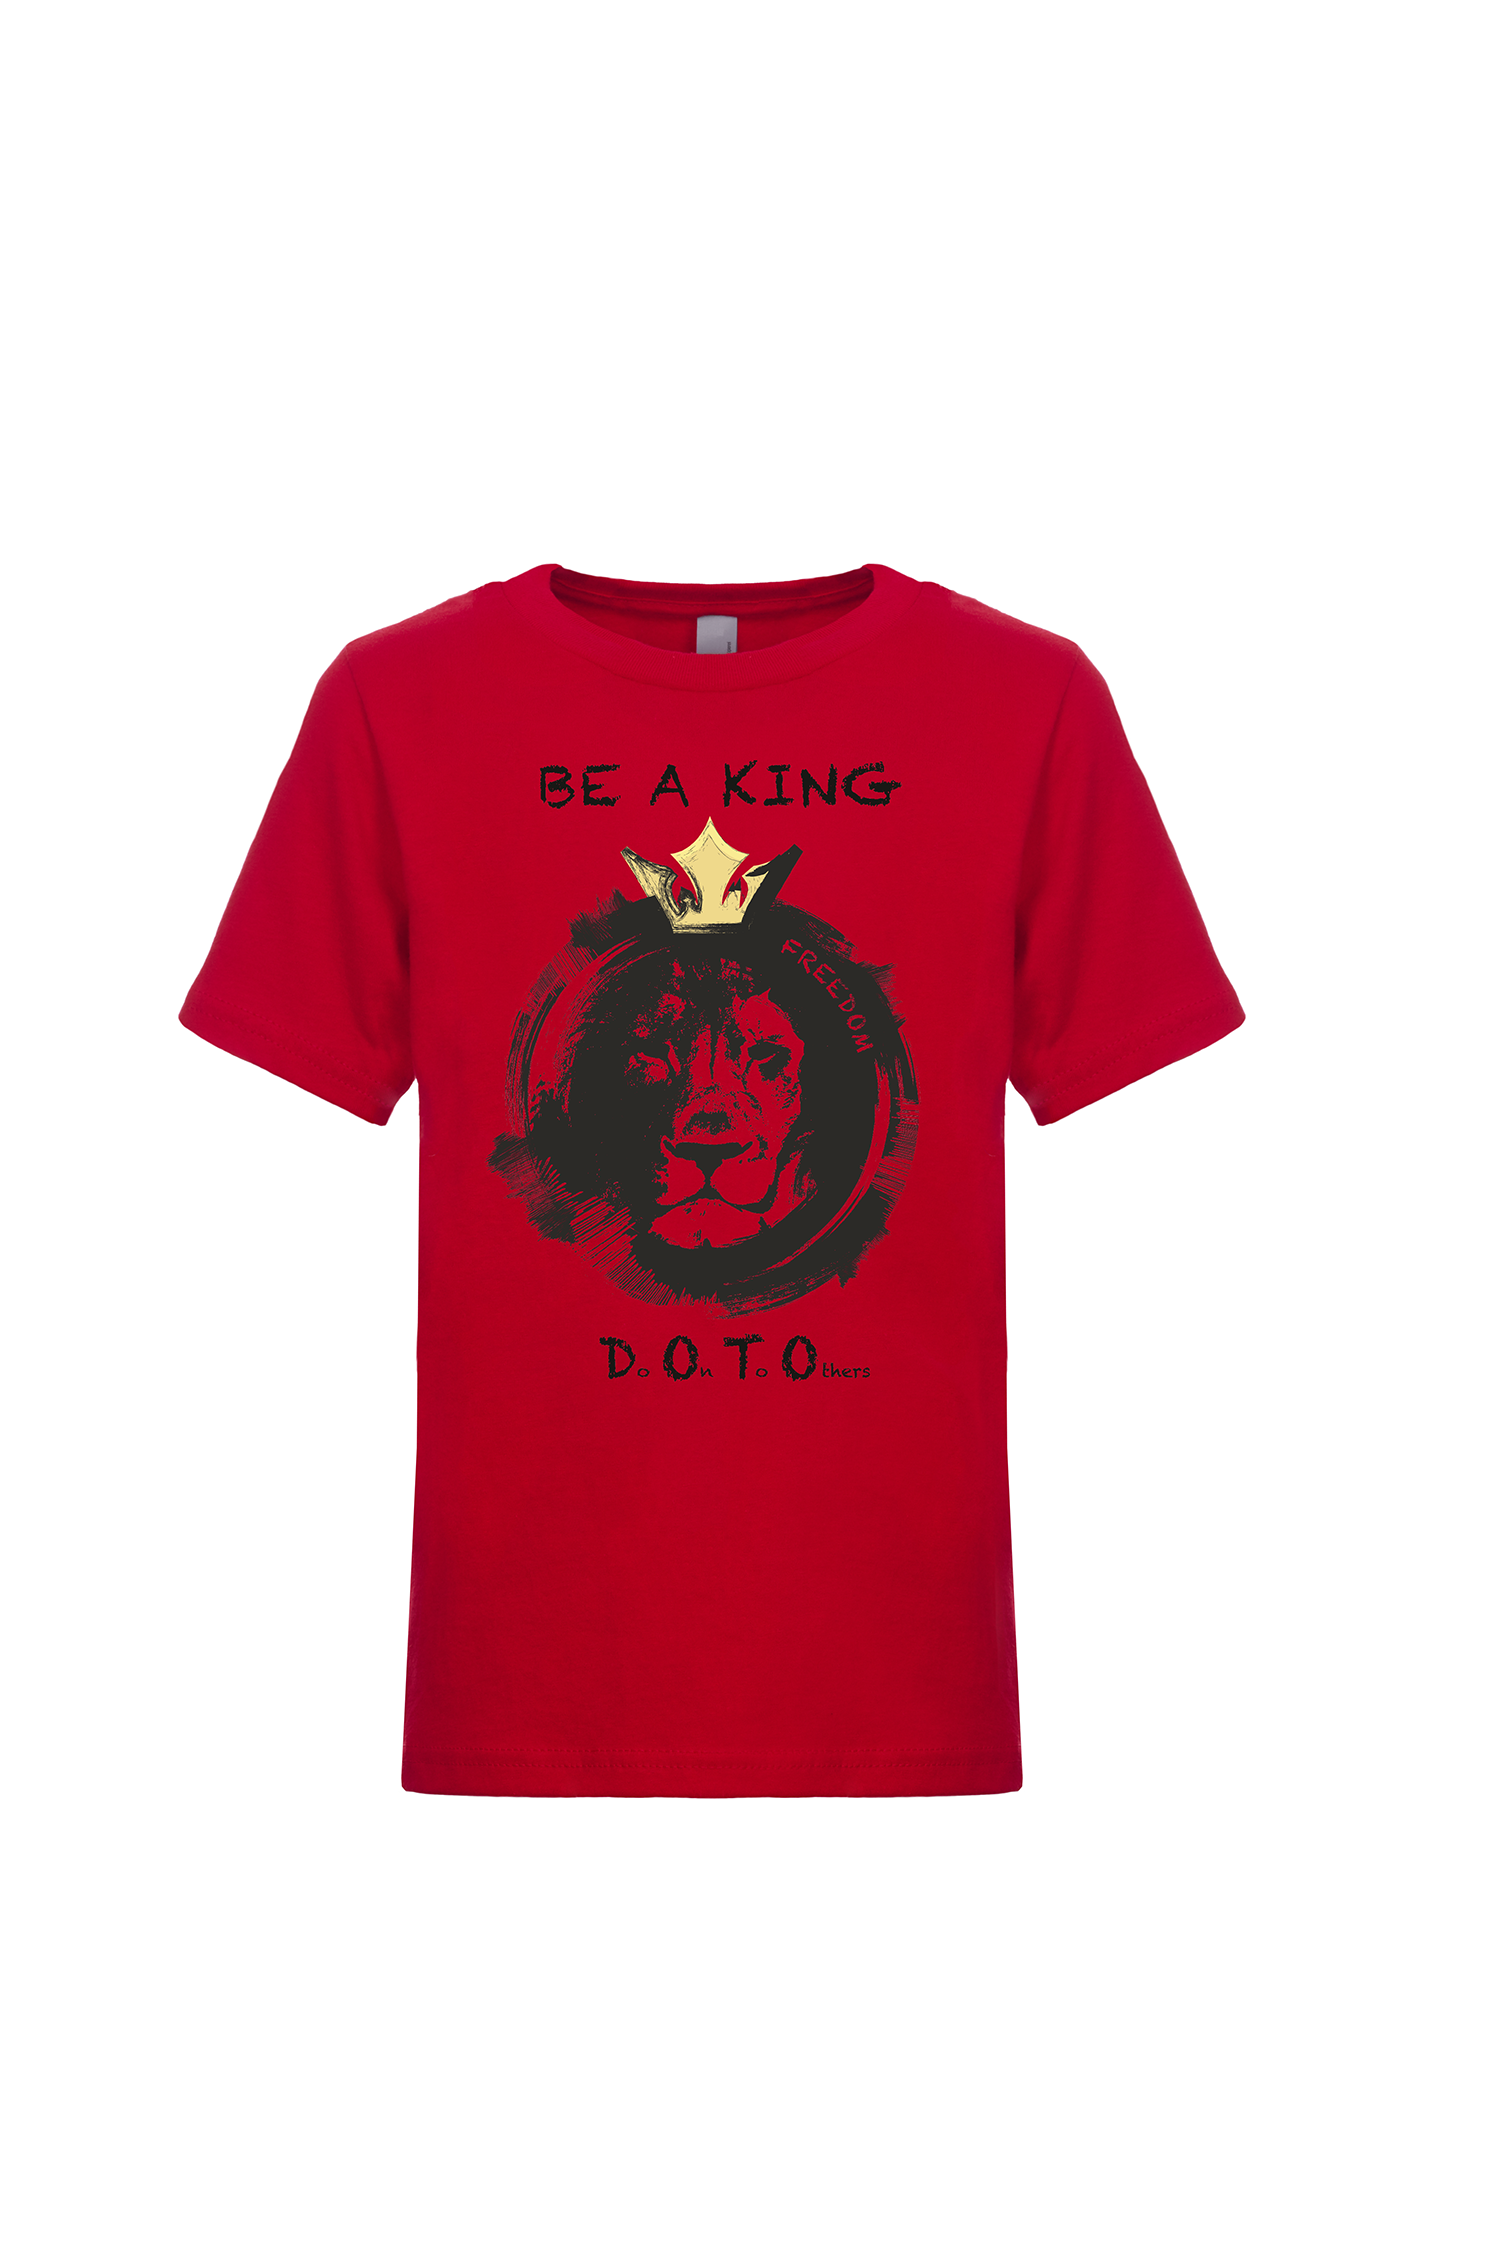 Be A King - Boy's Red short sleeve Tee